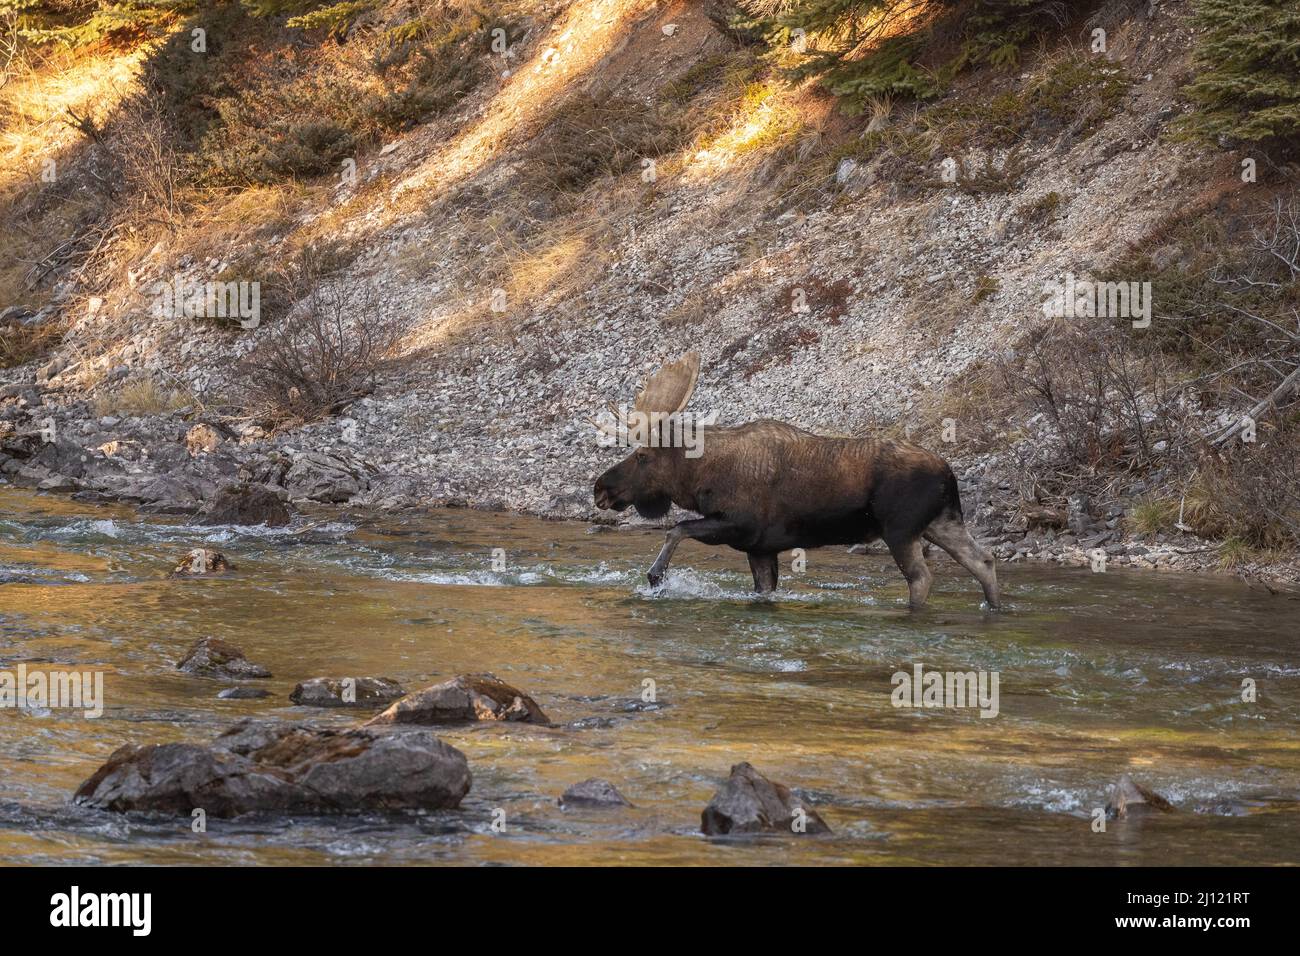 Big bull moose crossing a river in the Canadian Rockies. Stock Photo